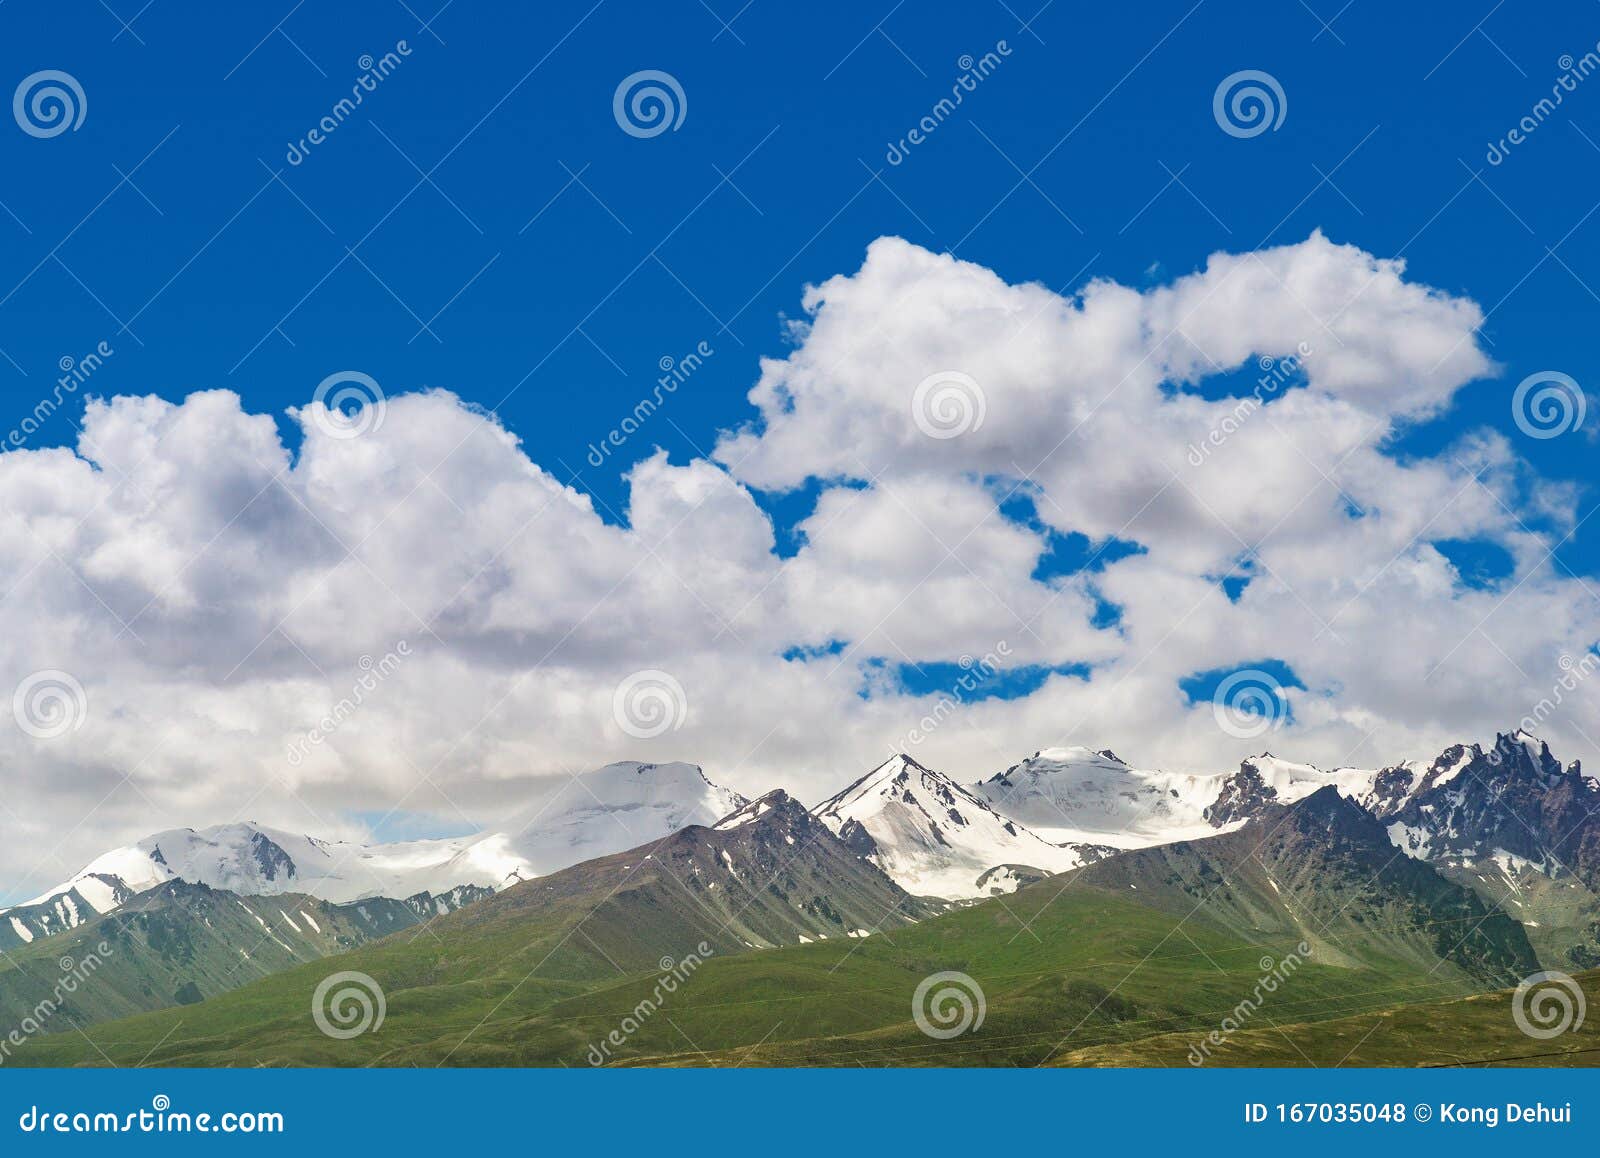 Majestic Snow Capped Mountain Peak with Green Alpine Meadows Stock